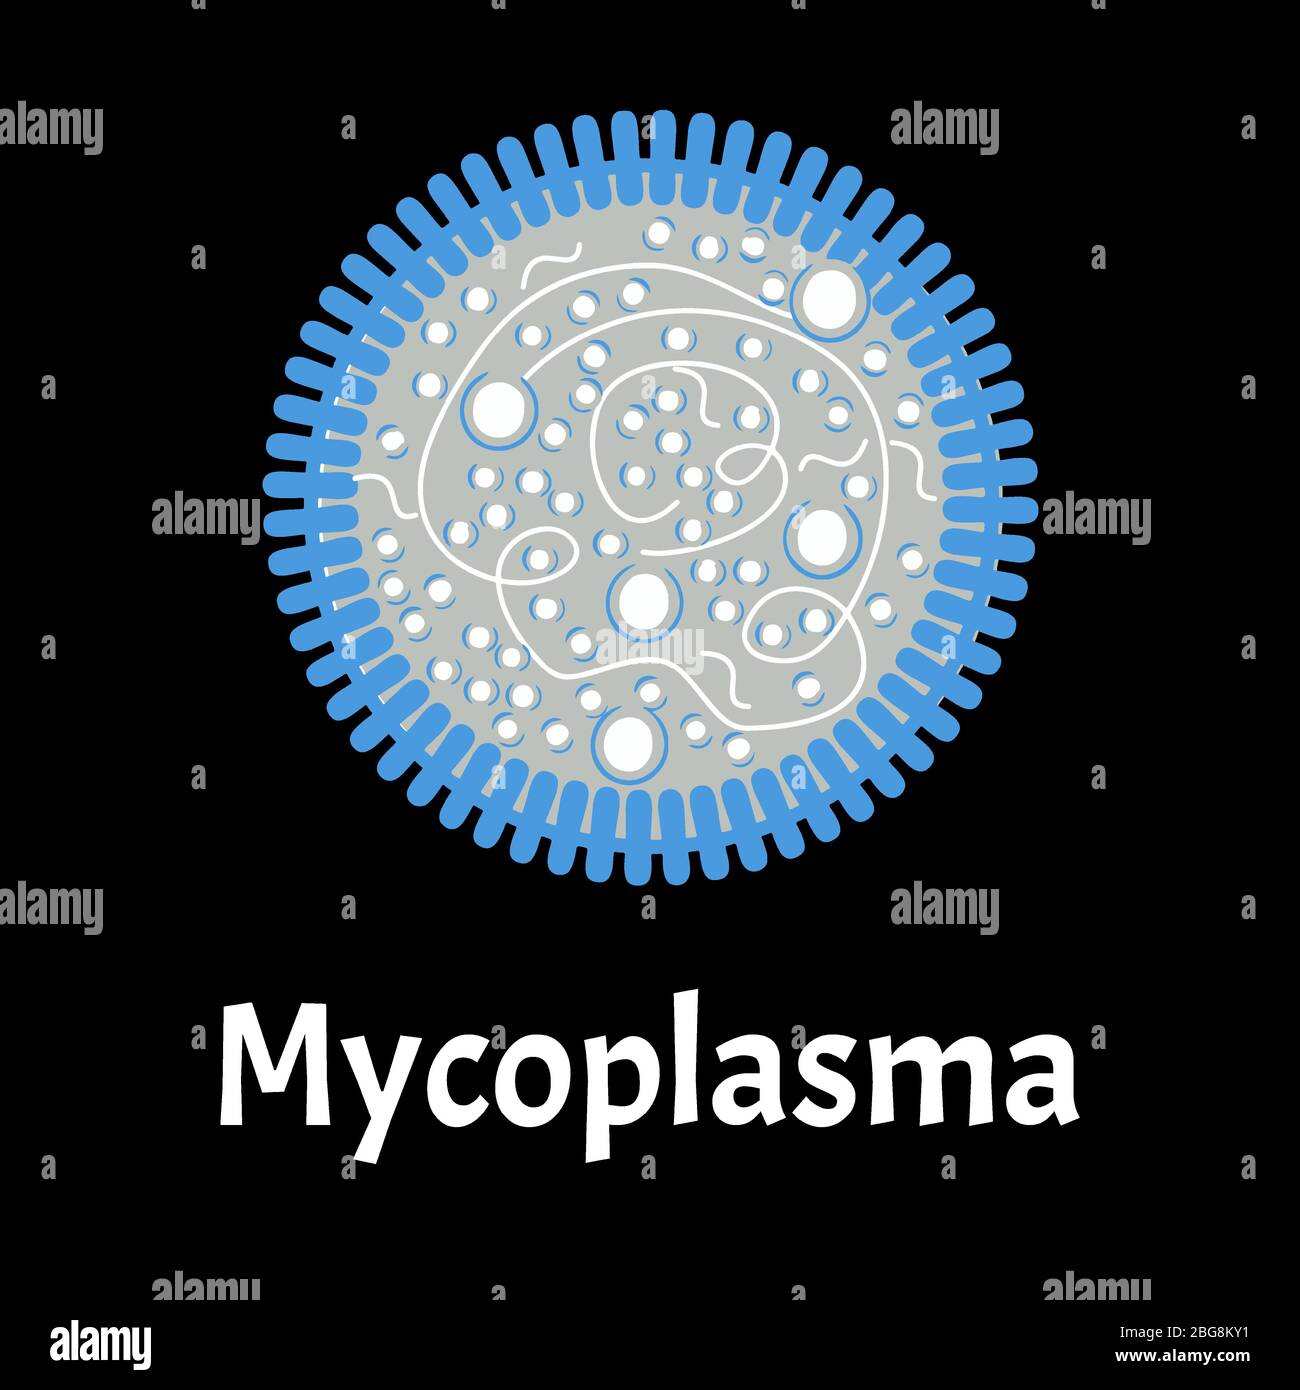 Mycoplasma. Bacterial infections Mycoplasma. Sexually transmitted diseases. Infographics. Vector illustration on isolated background. Stock Vector